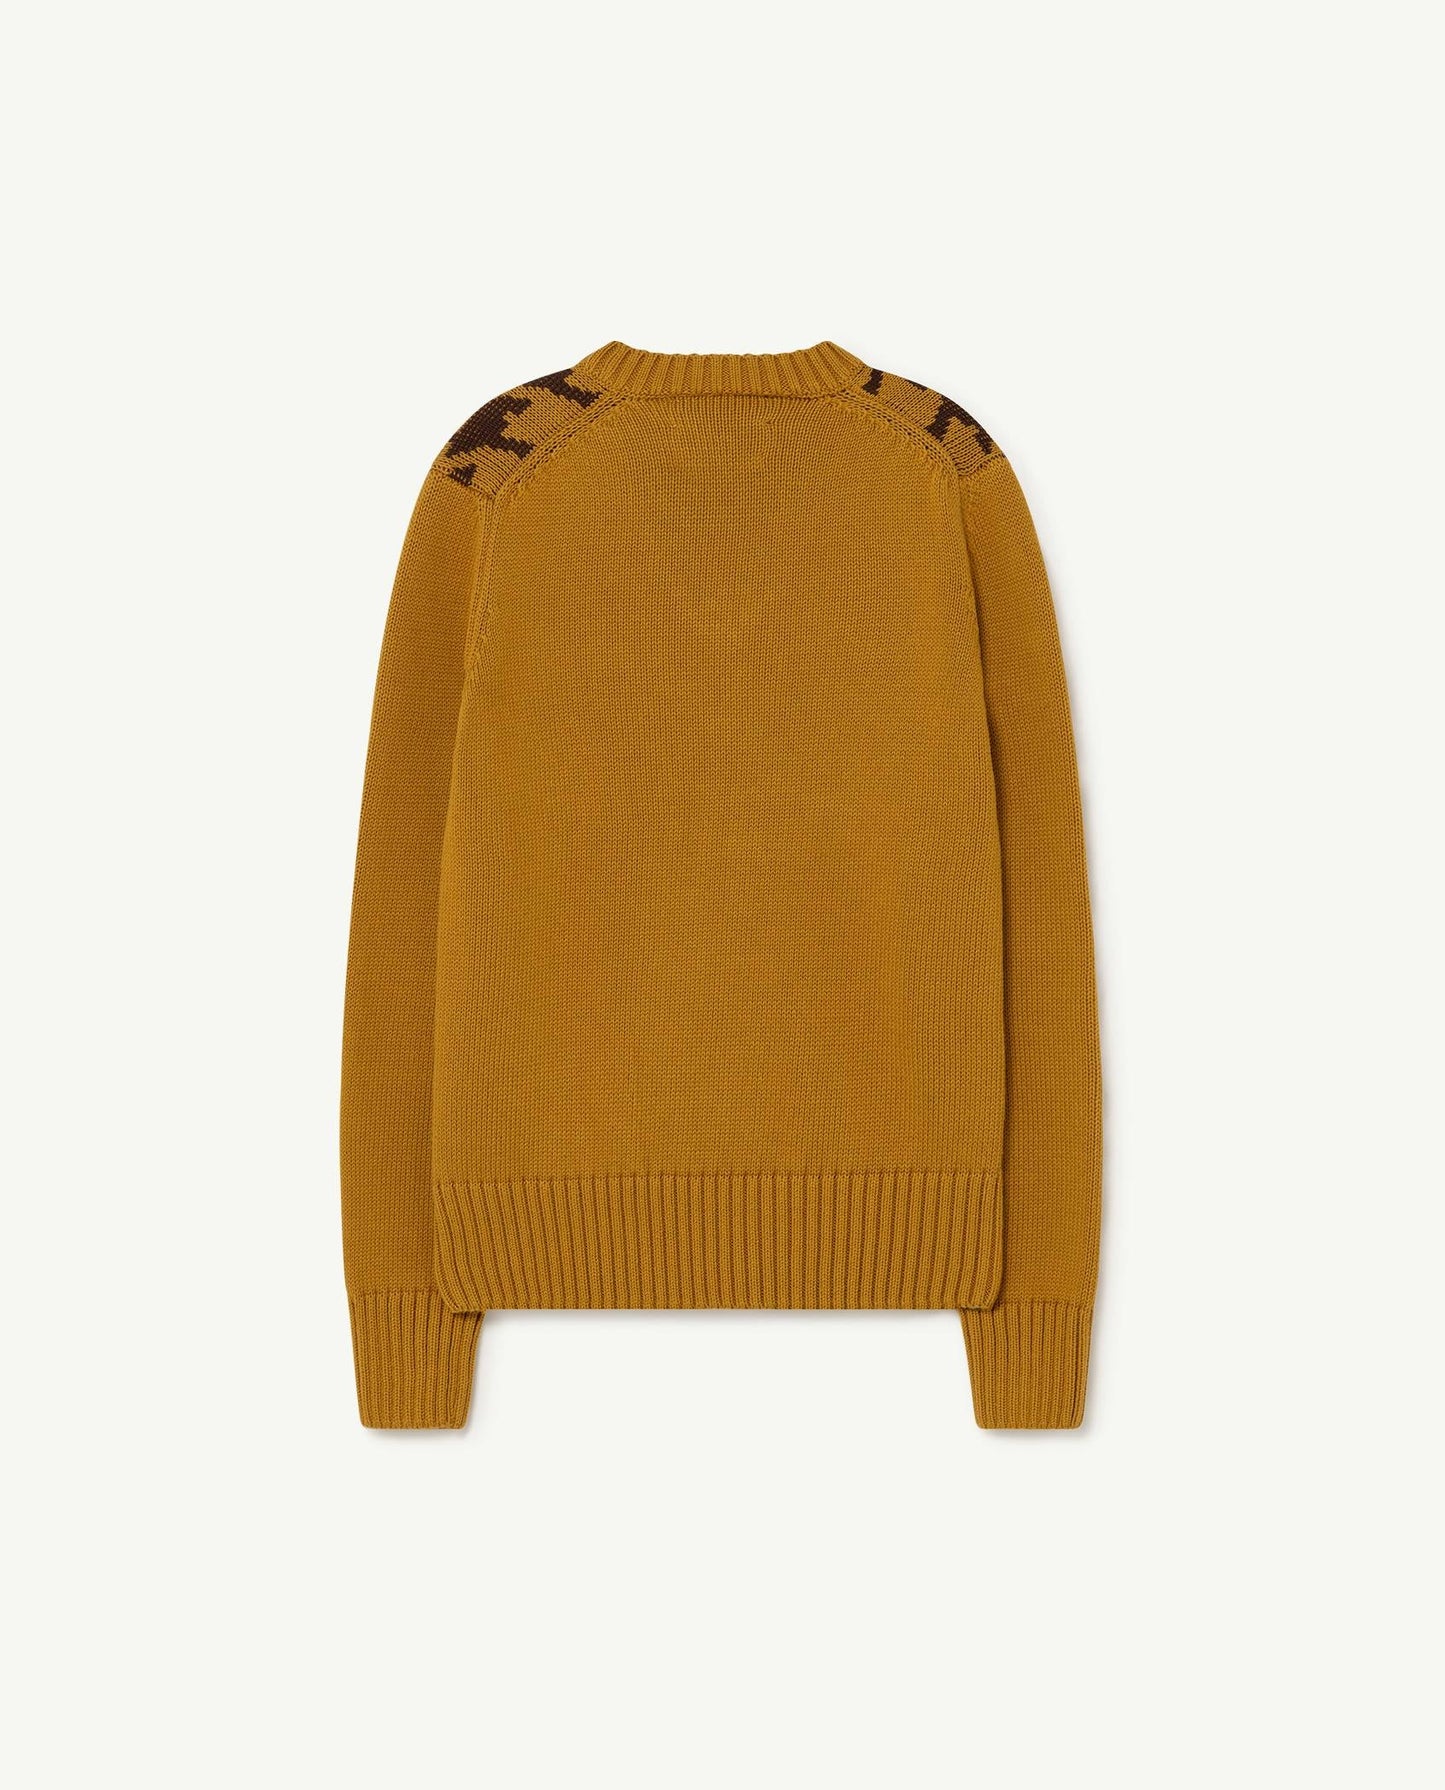 Toucan sweater Mustard Knitwear The Animals Observatory 